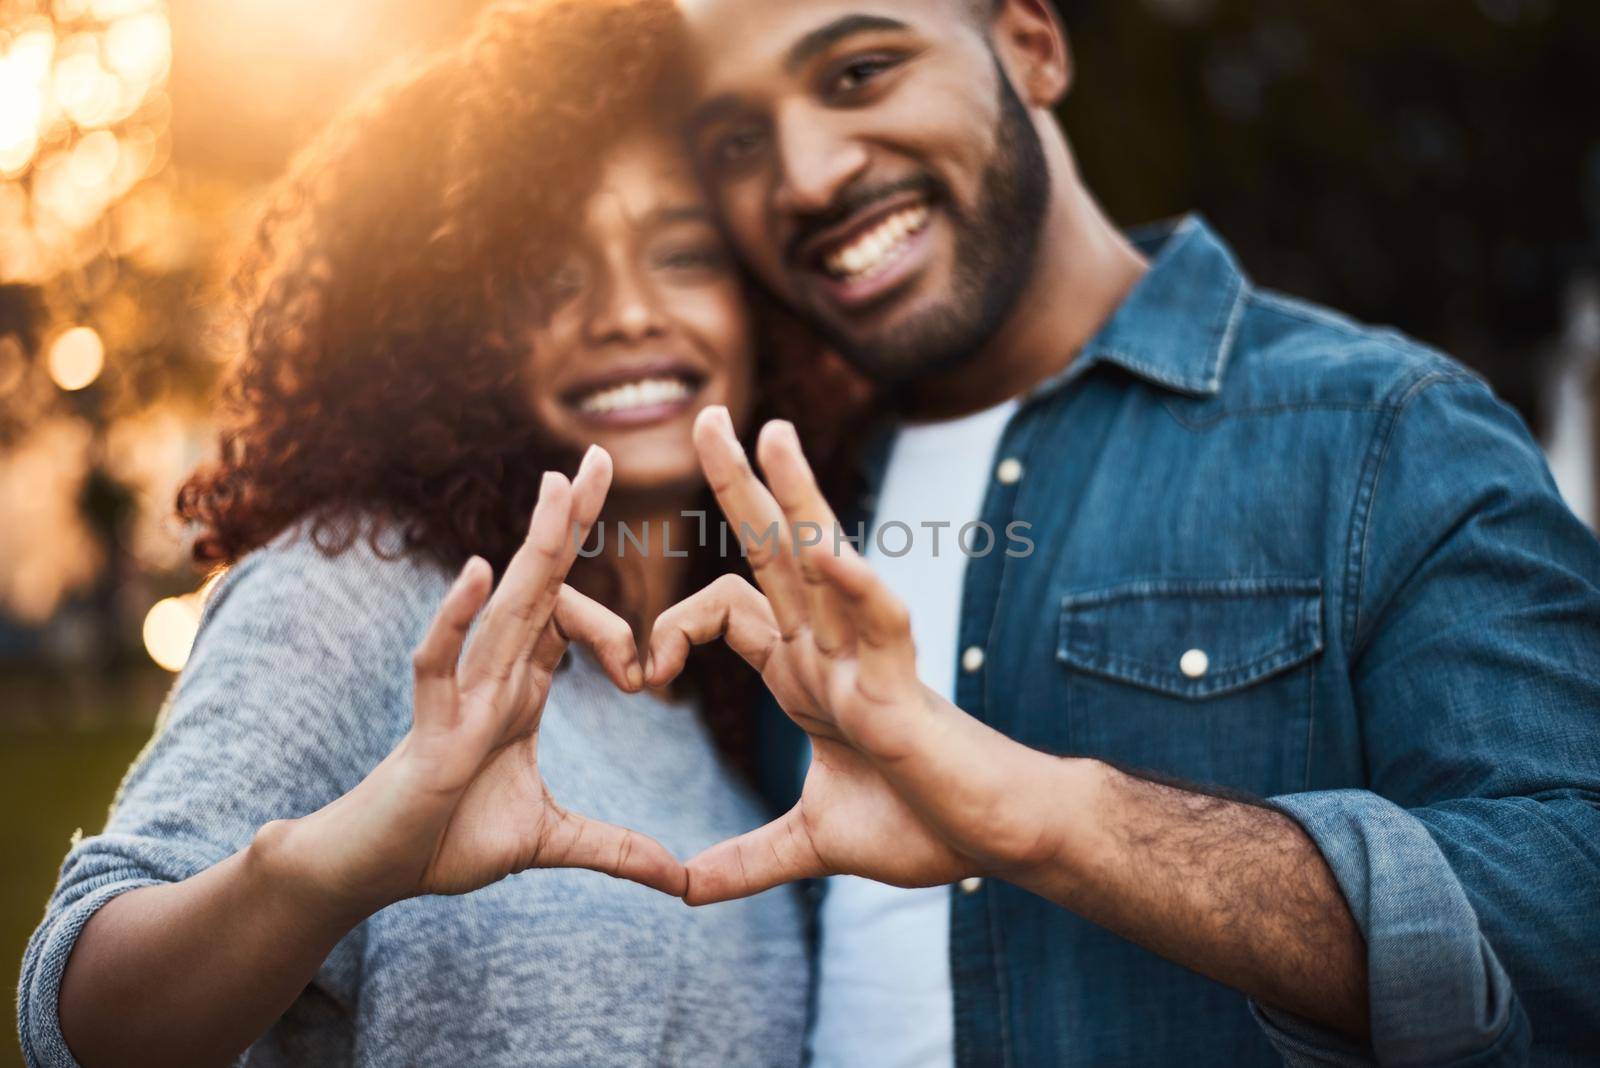 The heart knows what it wants. Portrait of a a young couple making a heart shape with their fingers outdoors. by YuriArcurs